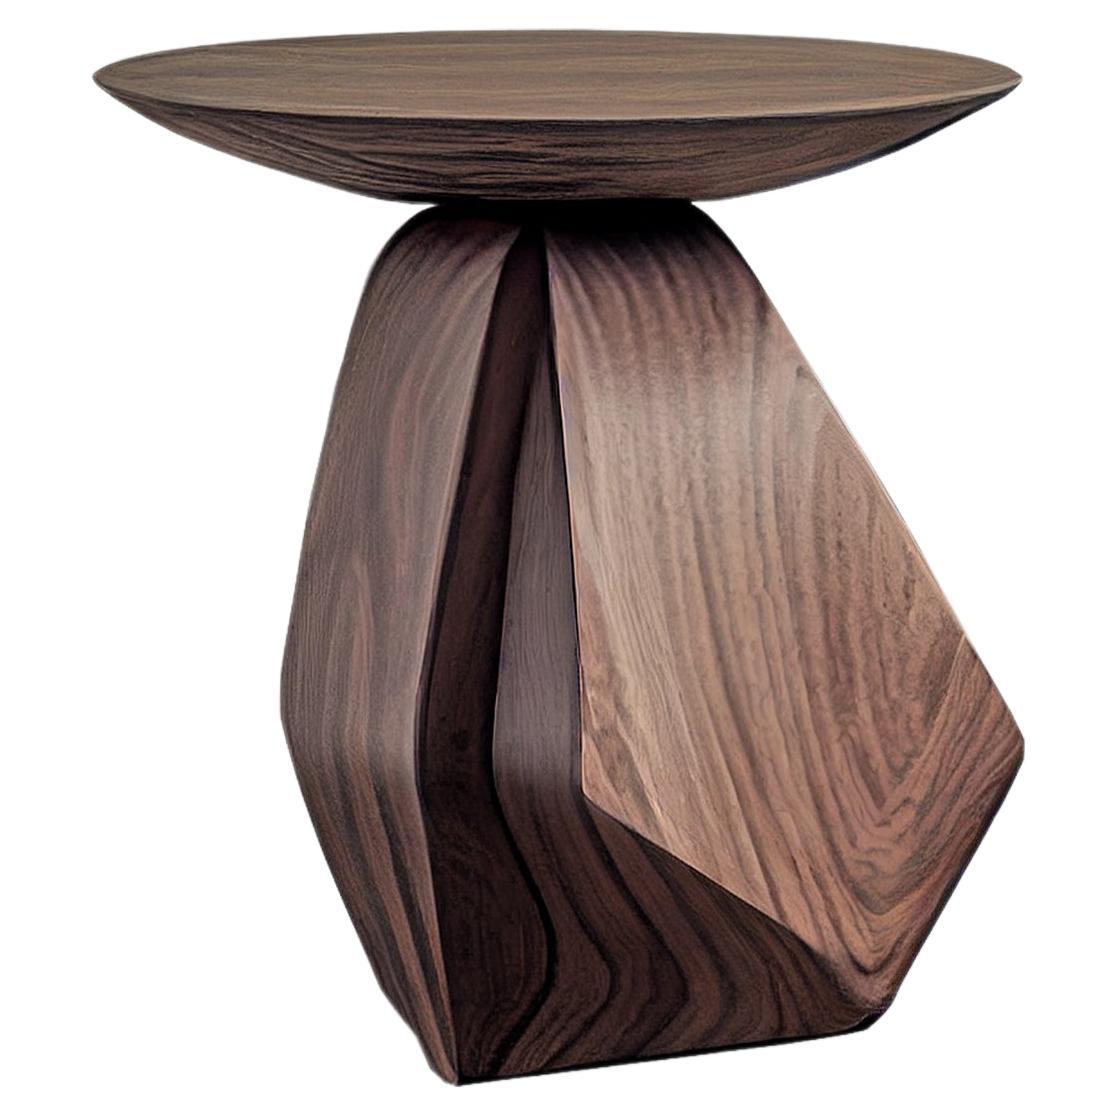 Organic Shape Solace 7: Circular Solid Walnut Side Table, Art Meets Function